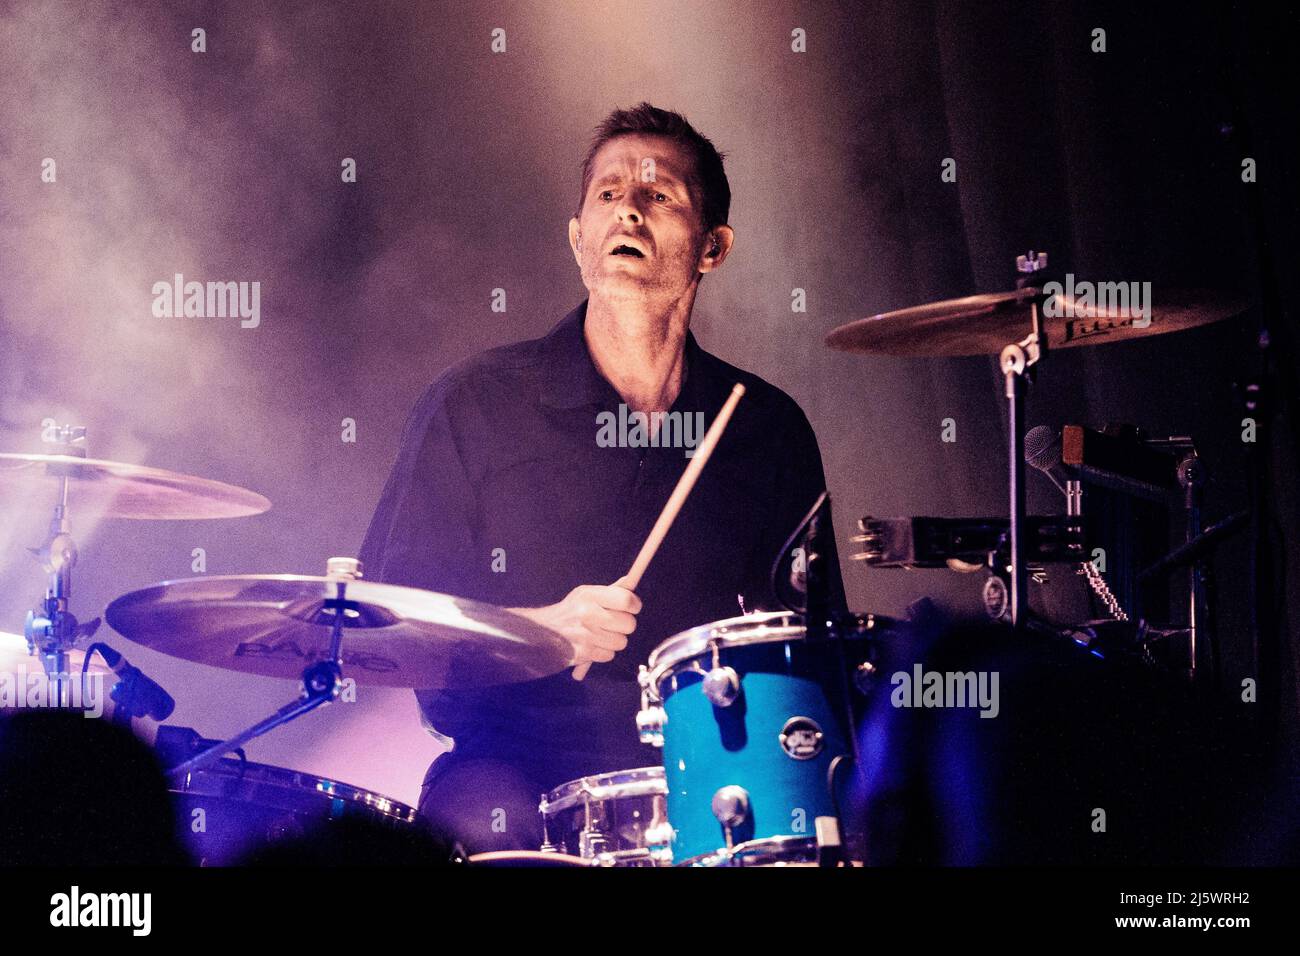 Roskilde, Denmark. 09th, April 2022. The Danish band Michael Learns to Rock performs a live concert at Gimle in Roskilde, Copenhagen. Here drummer Kaare Wanscher is seen live on stage. (Photo credit: Gonzales Photo - Thomas Rungstrom). Stock Photo